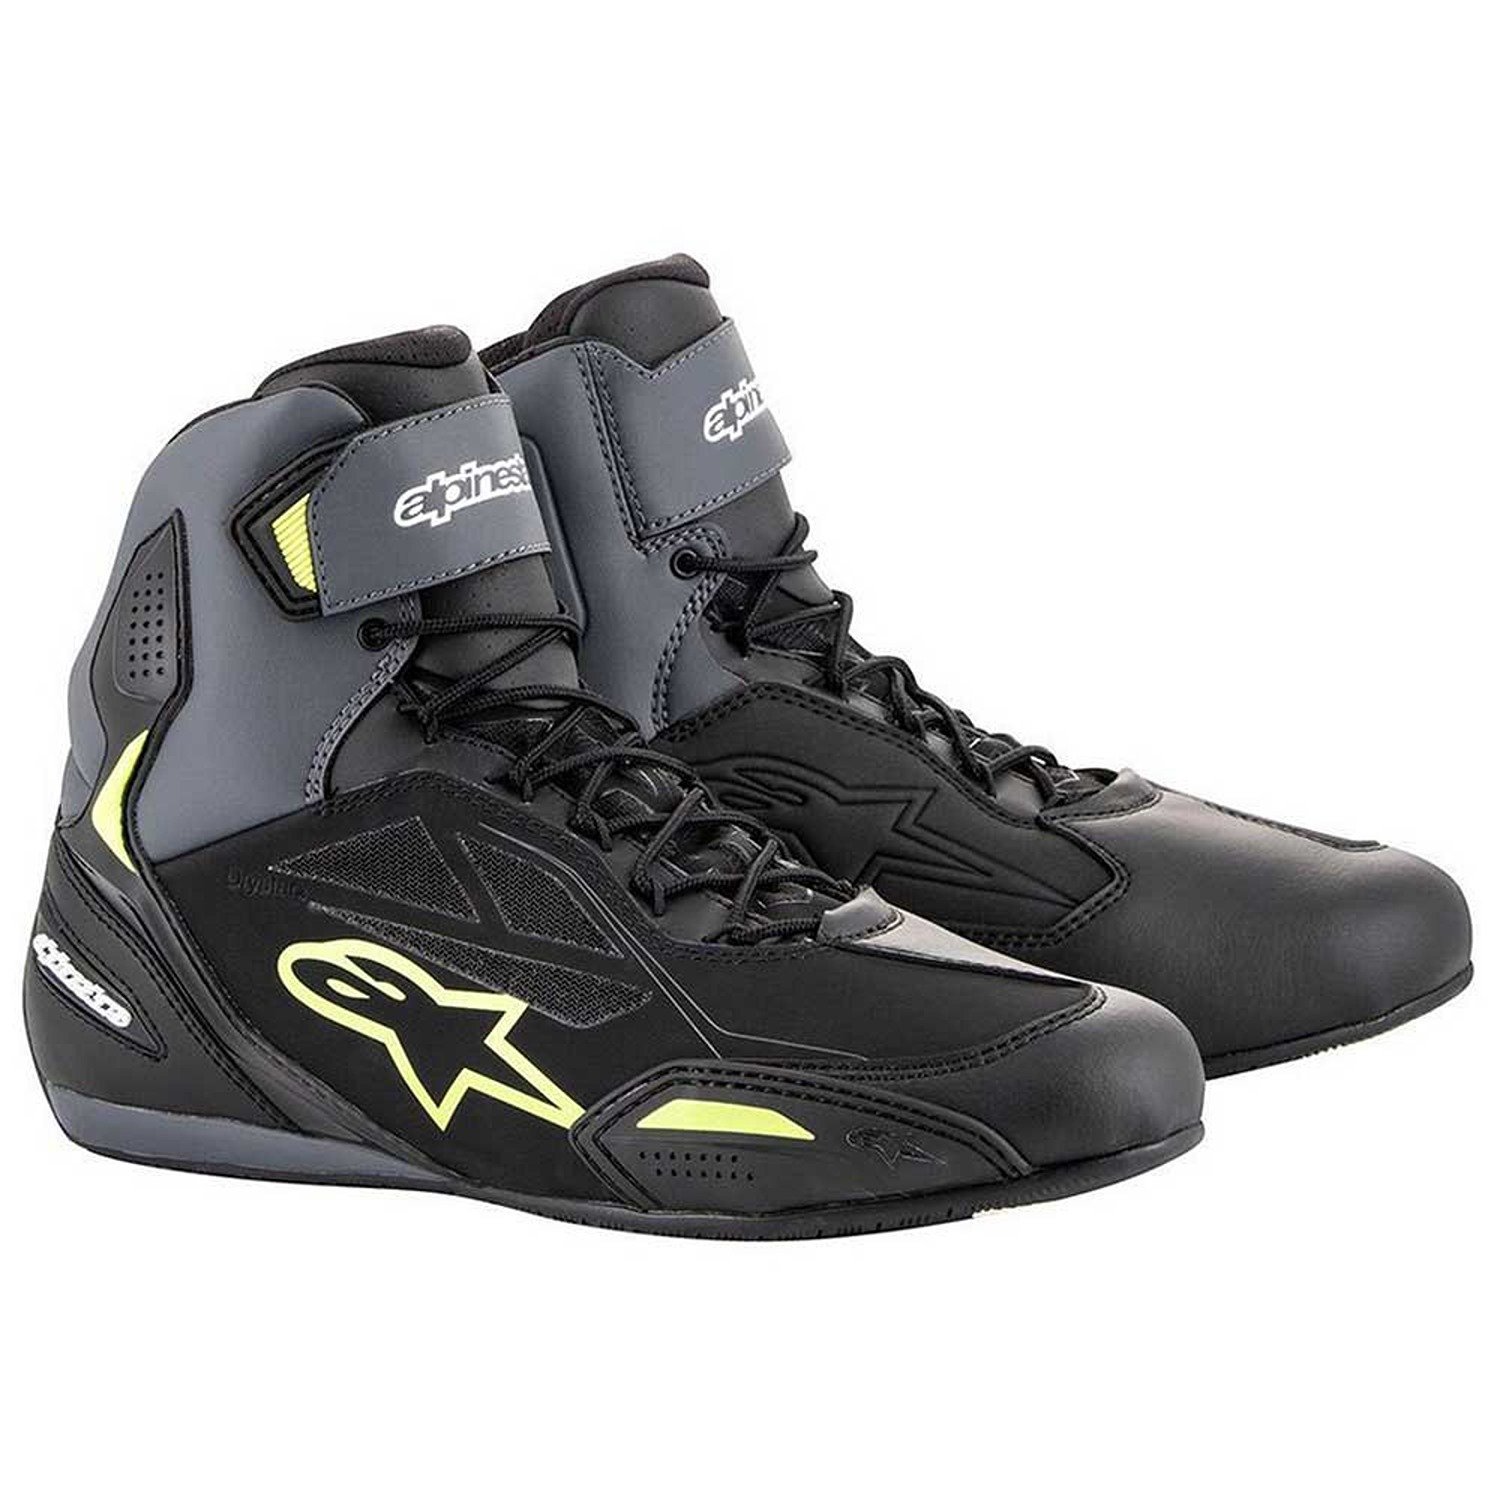 Image of Alpinestars Faster-3 Shoes Black Yellow Fluo Size US 65 EN